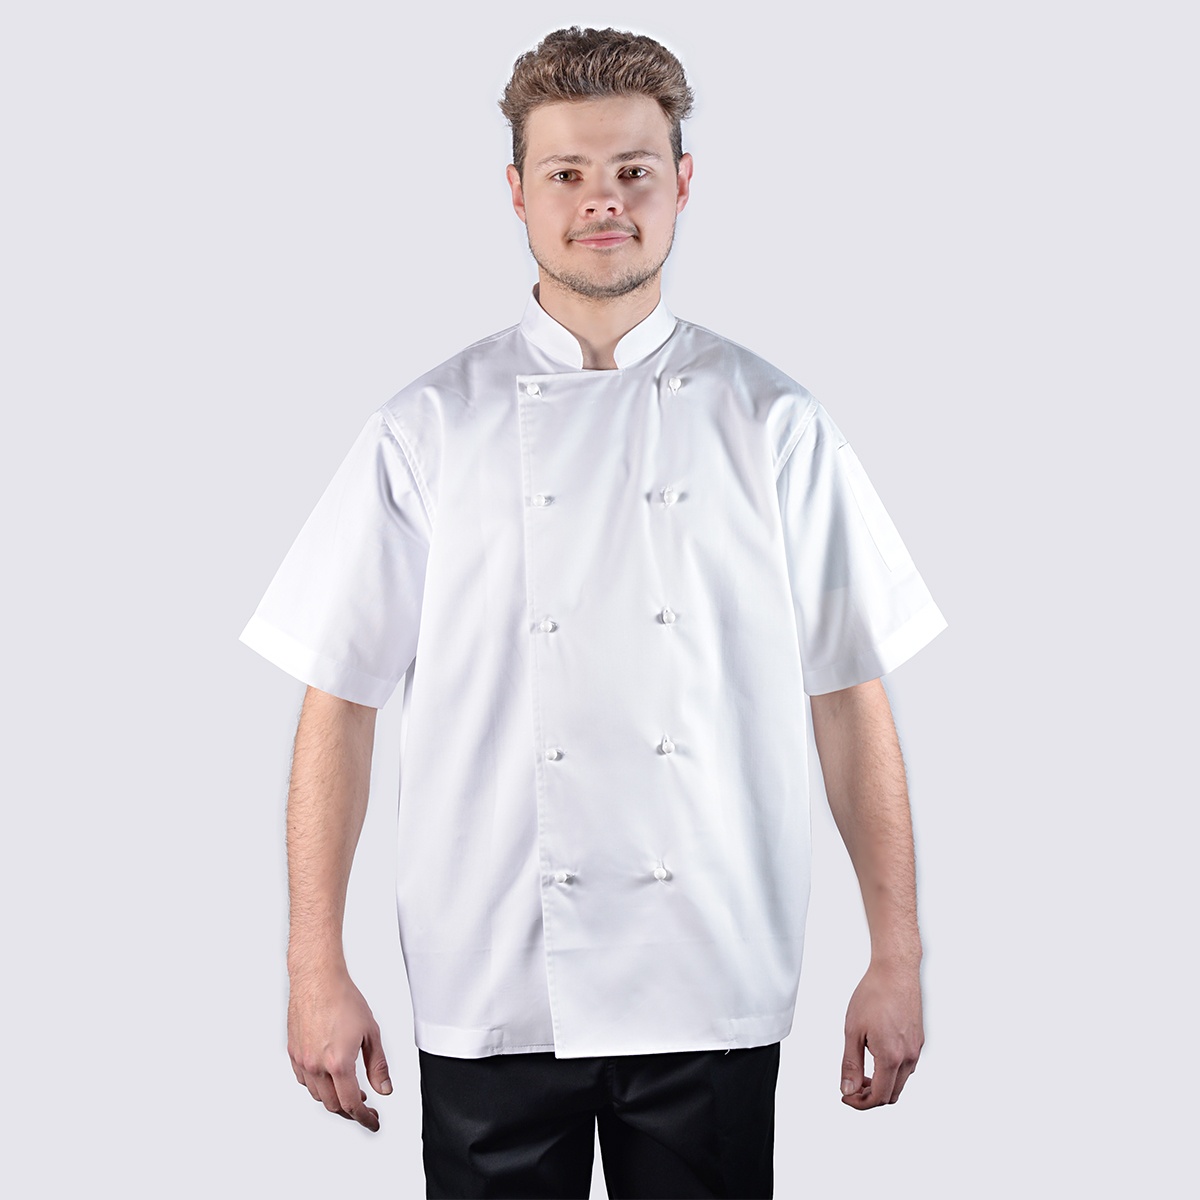 chef jackets white short sleeve with white buttons